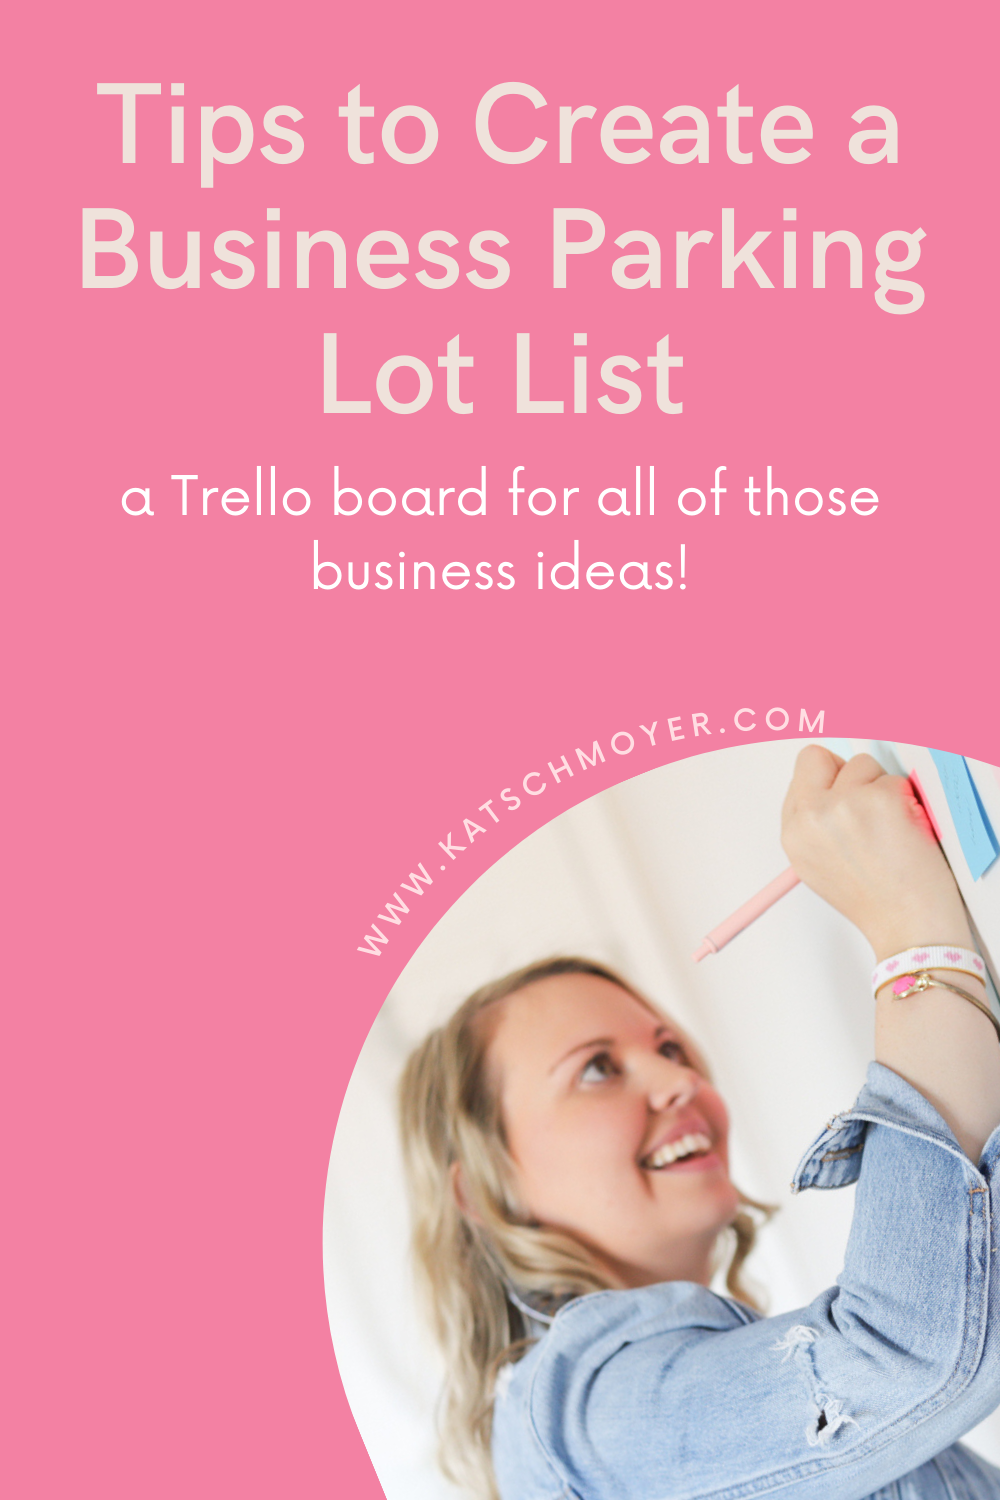 How to create a business parking lot list on Trello to capture all of your new business ideas and inspiration shared by business integrator and coach Kat Schmoyer.